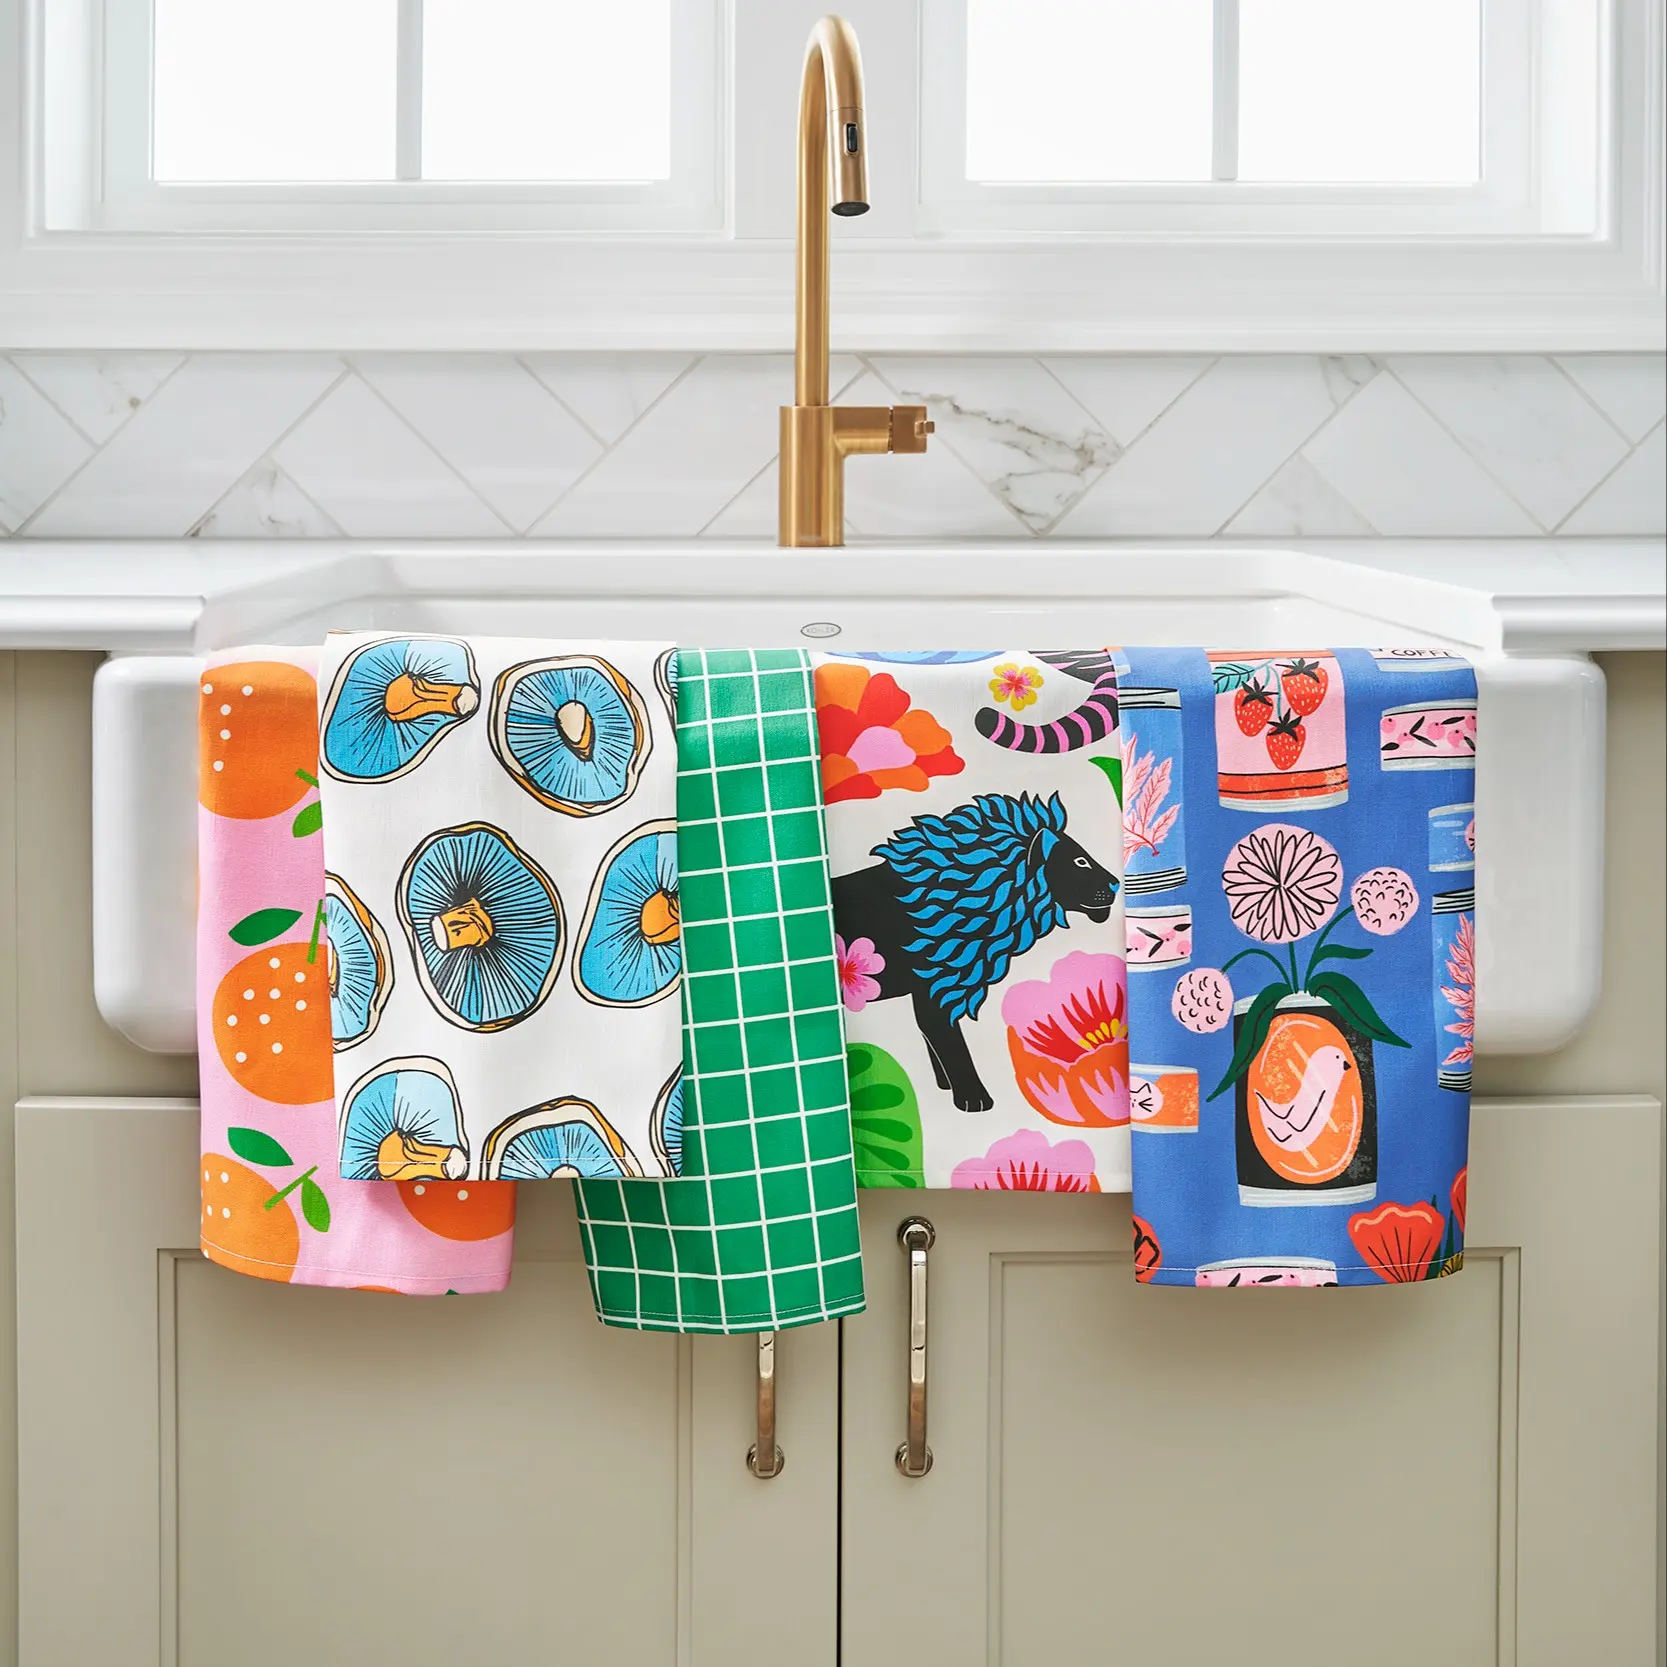 Colorful tea towels hanging from kitchen sink